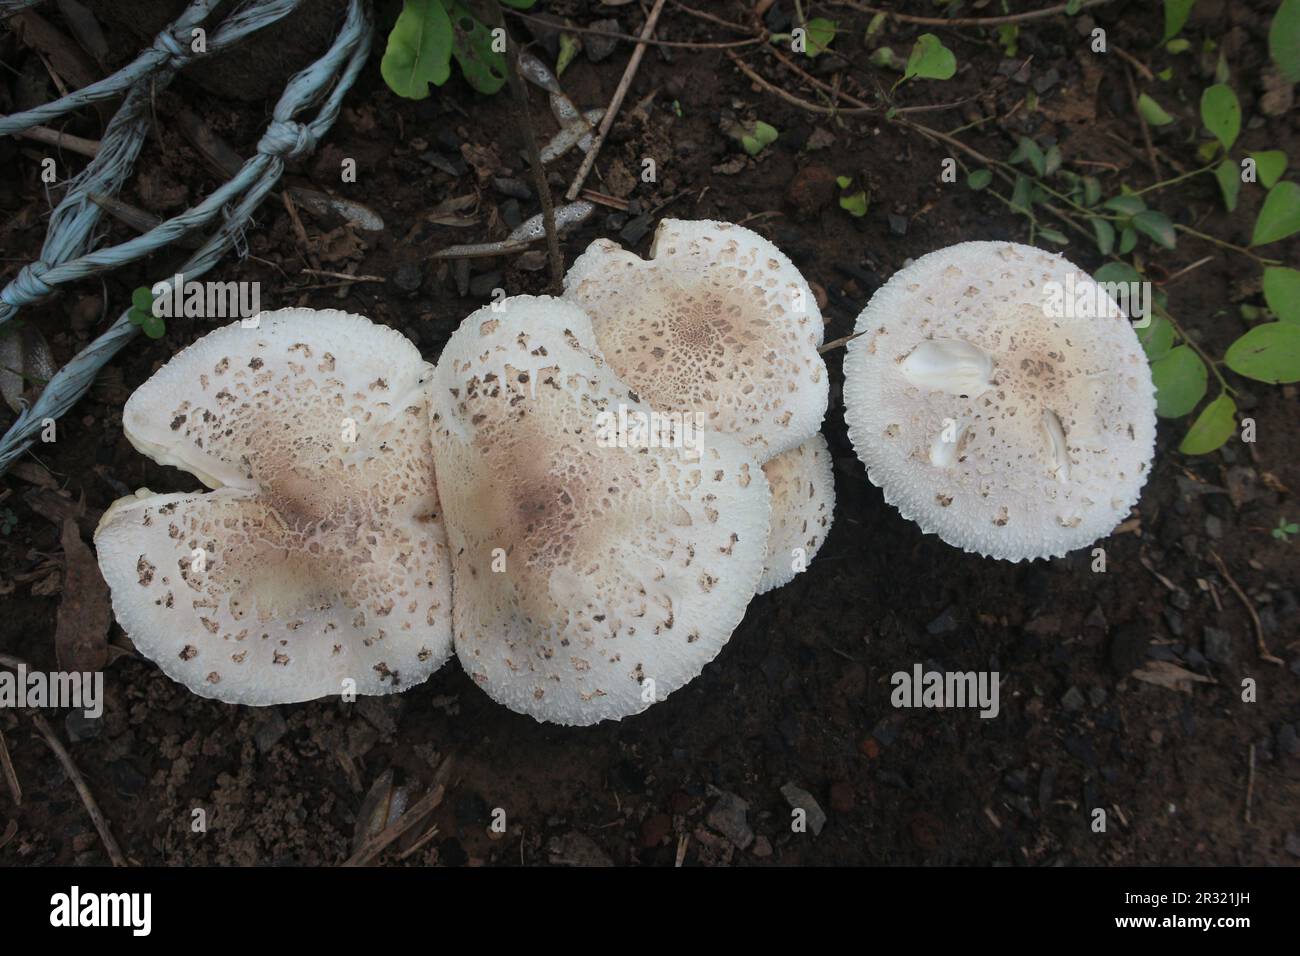 Close-up of an edible Oyster Mushroom growing on the land. It's white gills and plant-like structure are part of the Agaricus family in the Fungi kingdom. Stock Photo